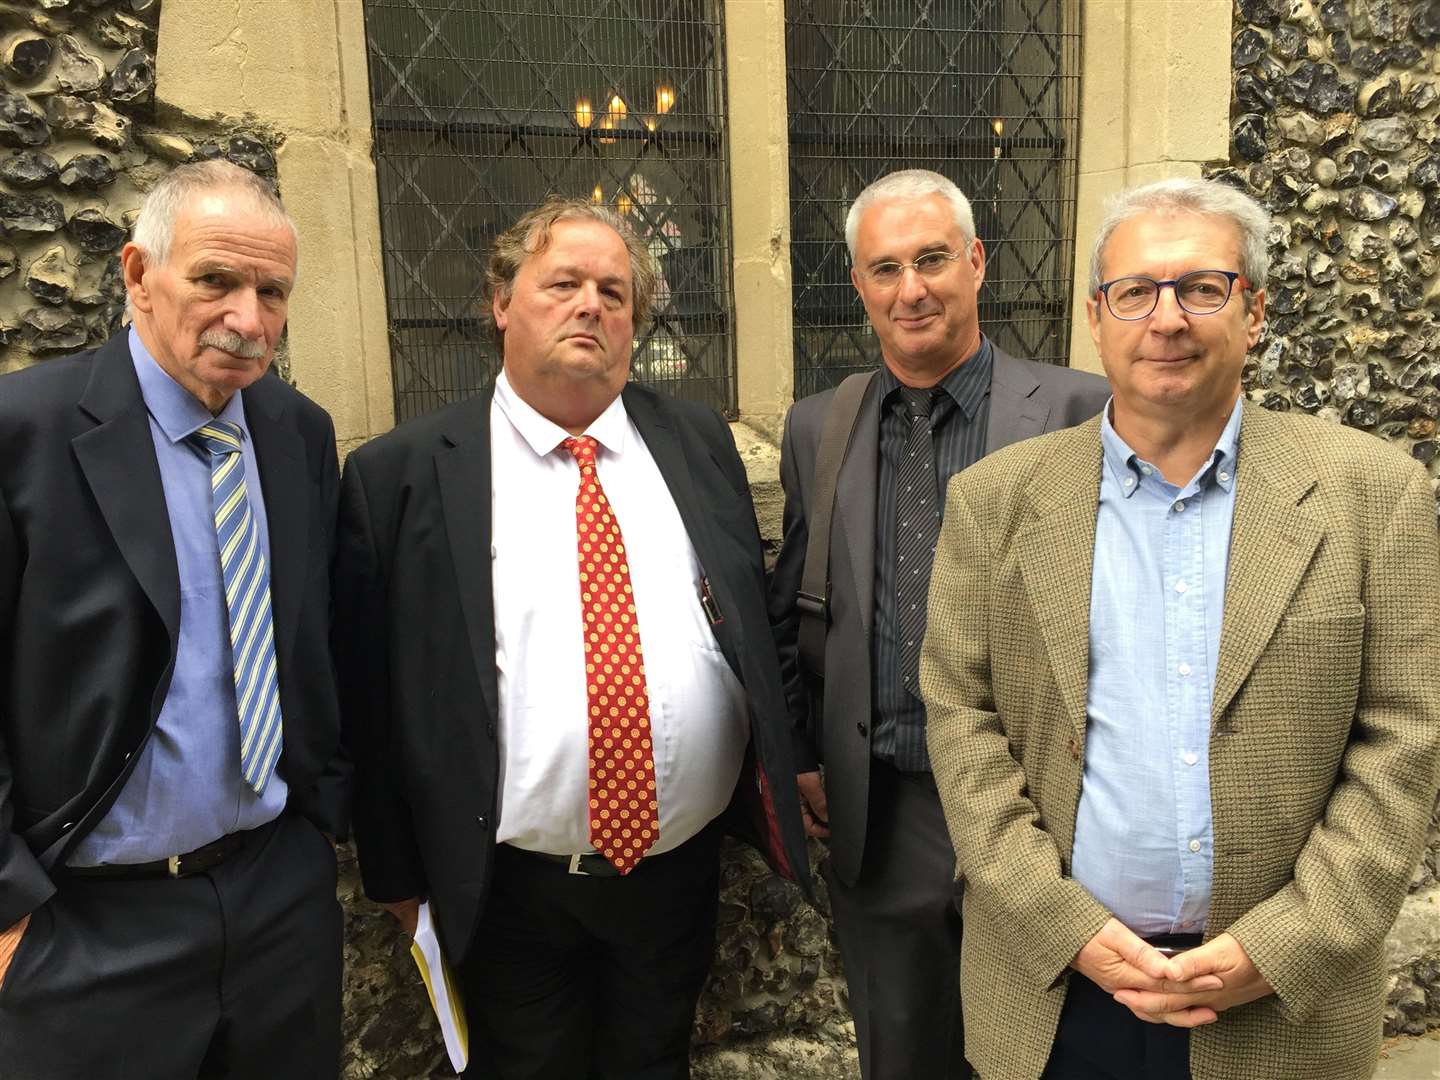 From left to right, residents Dr Robert Jackson, Mark Boardman, Steven Barrow and Gerard Jakamavicius outside the planning inquiry